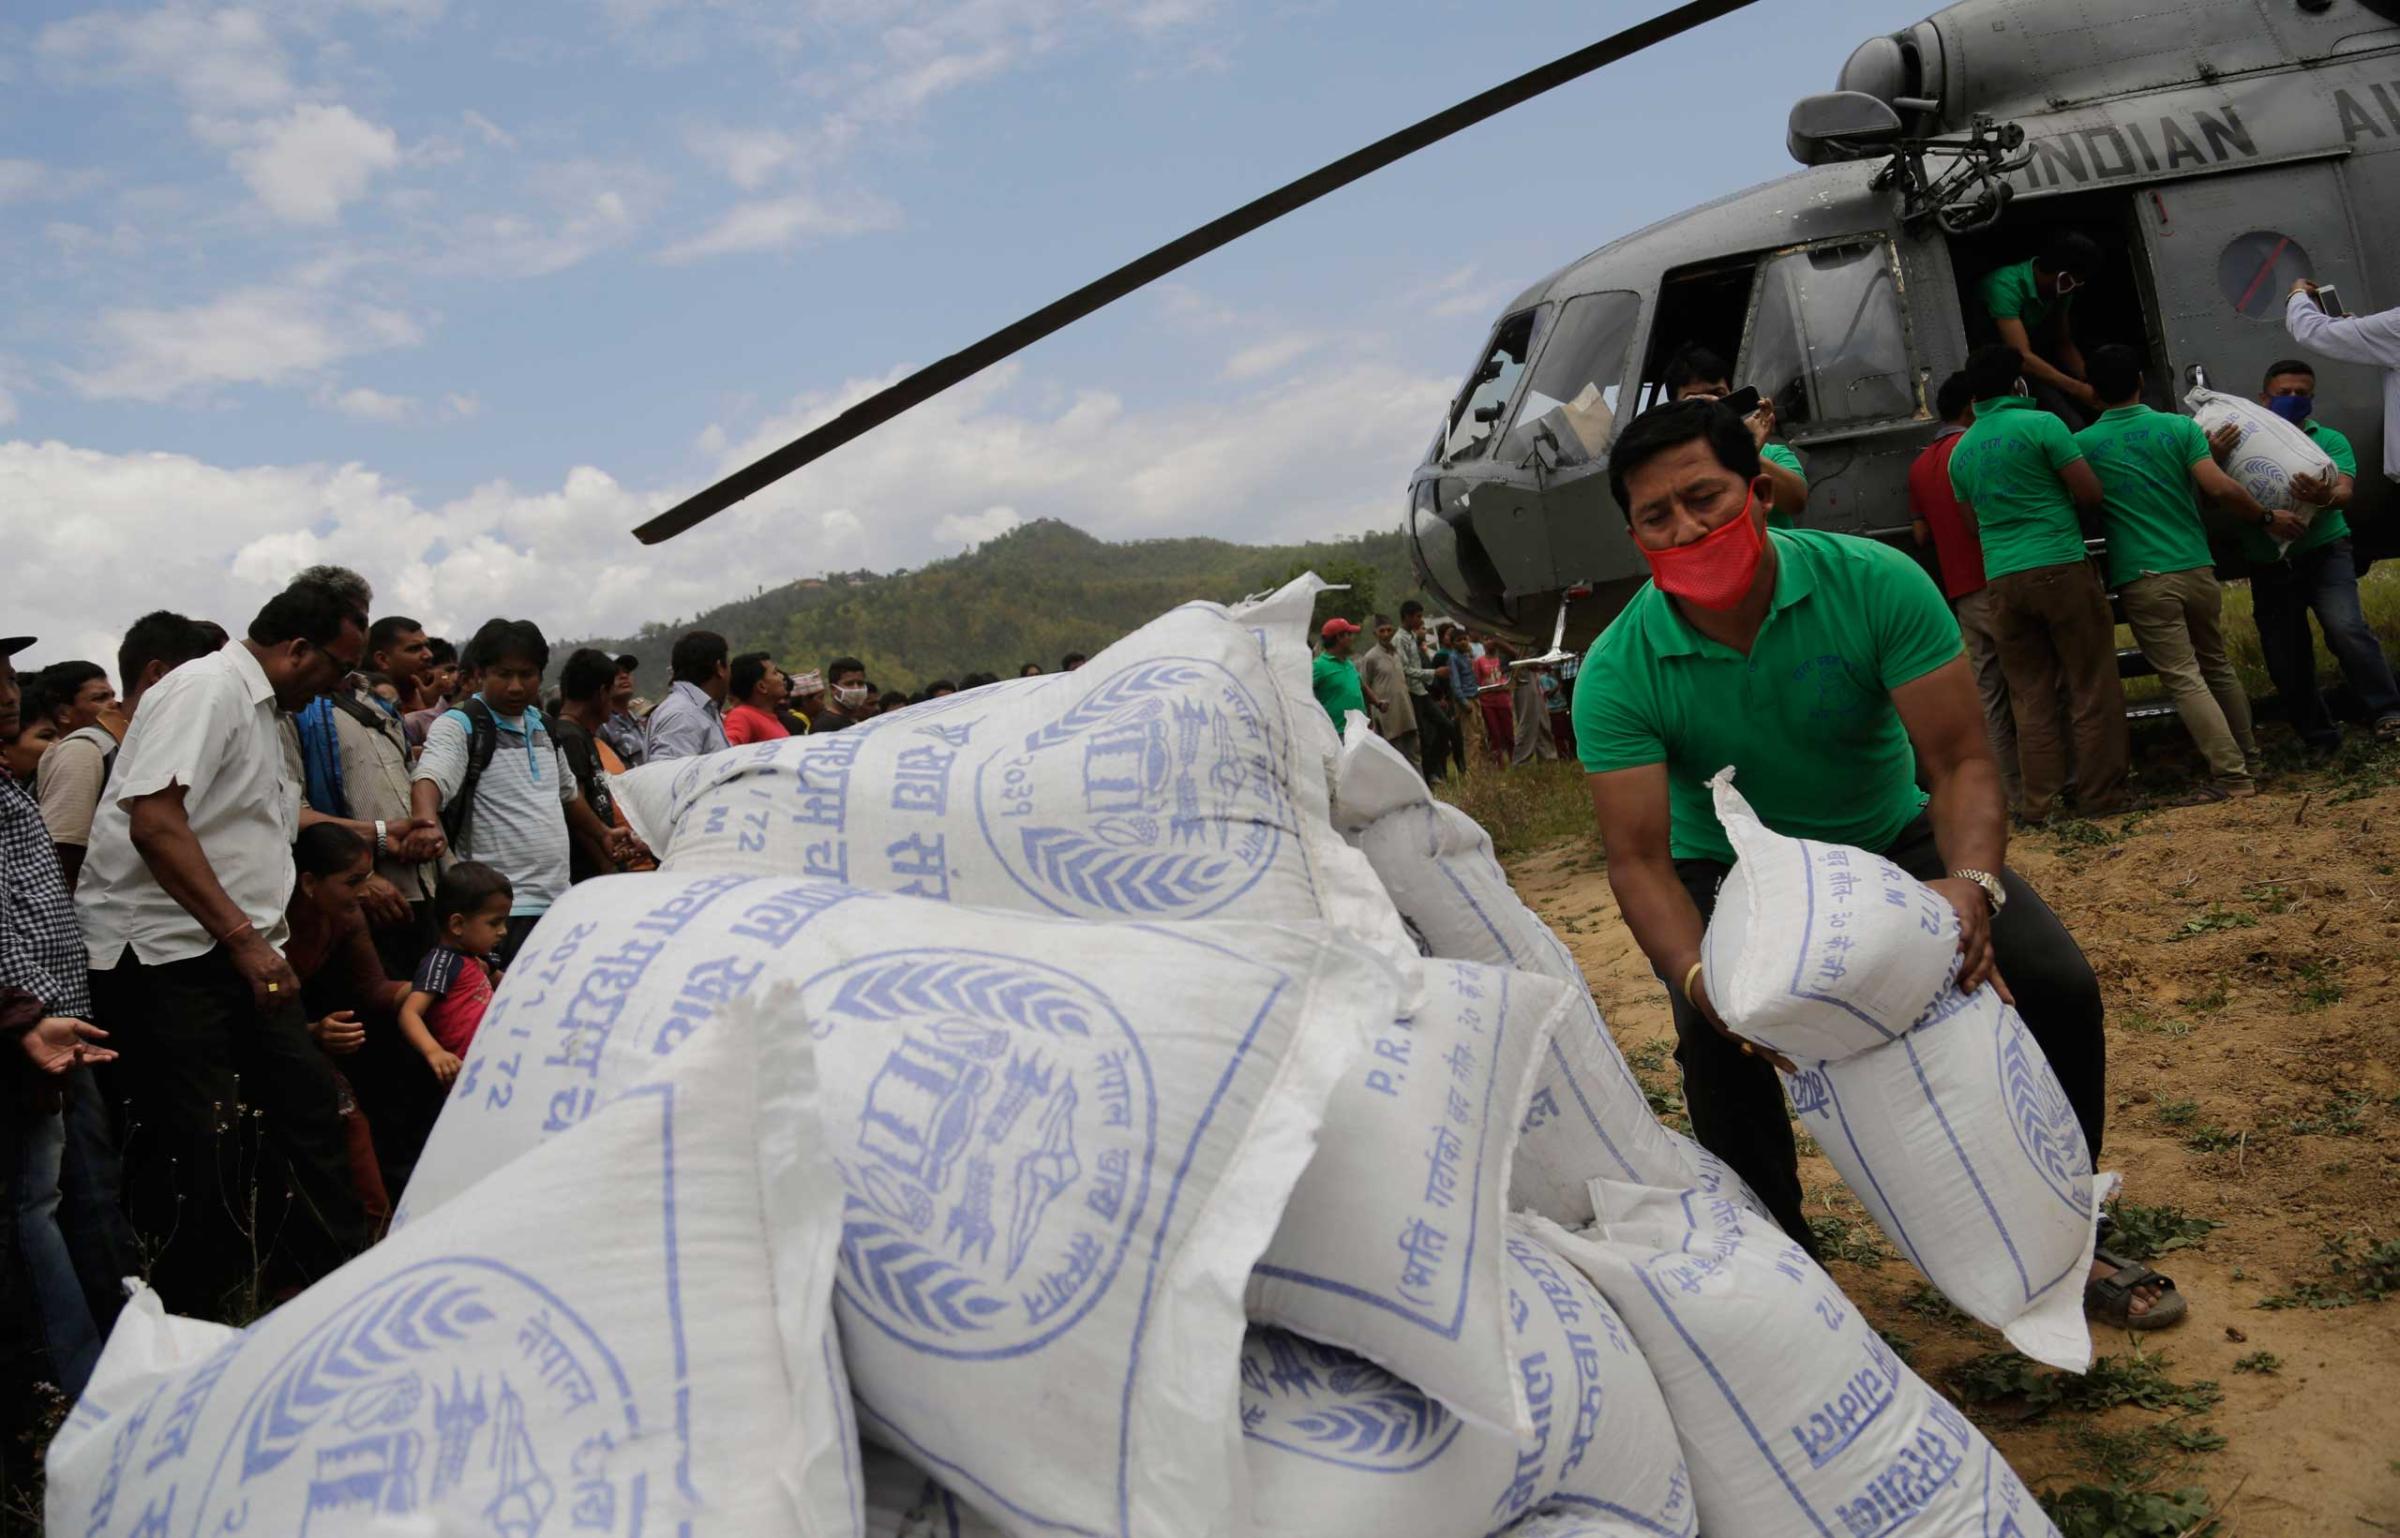 Nepalese volunteers unload relief material, brought by an Indian Air Force helicopter for victims of Saturday's earthquake at Trishuli Bazar in Nepal on April 27, 2015.